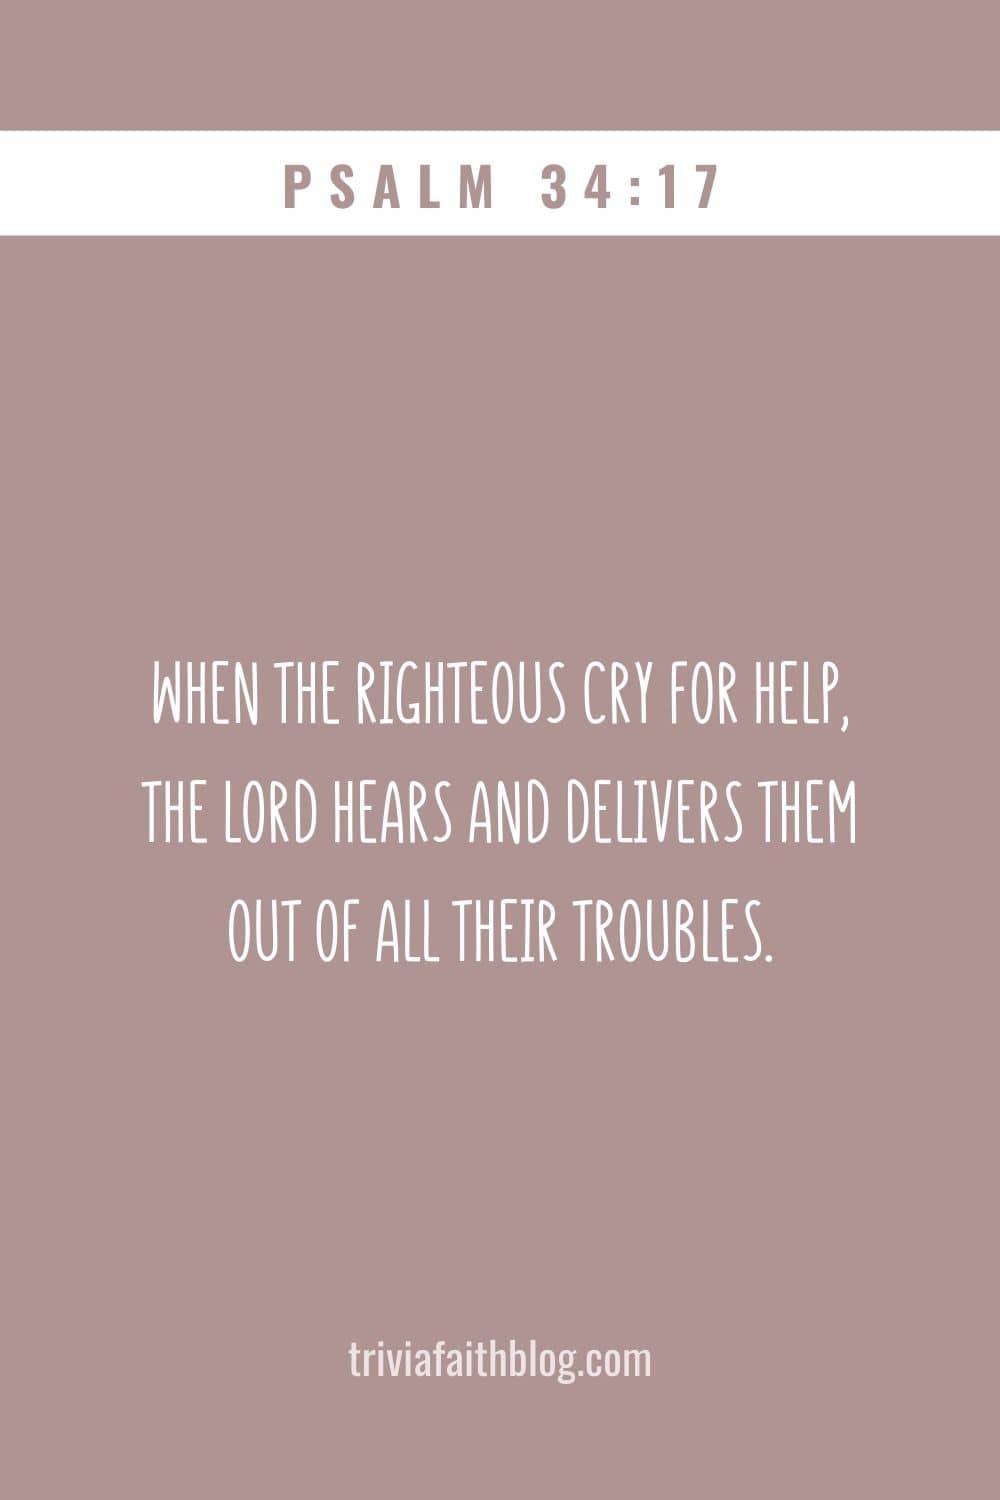 When the righteous cry for help, the Lord hears and delivers them out of all their troubles.